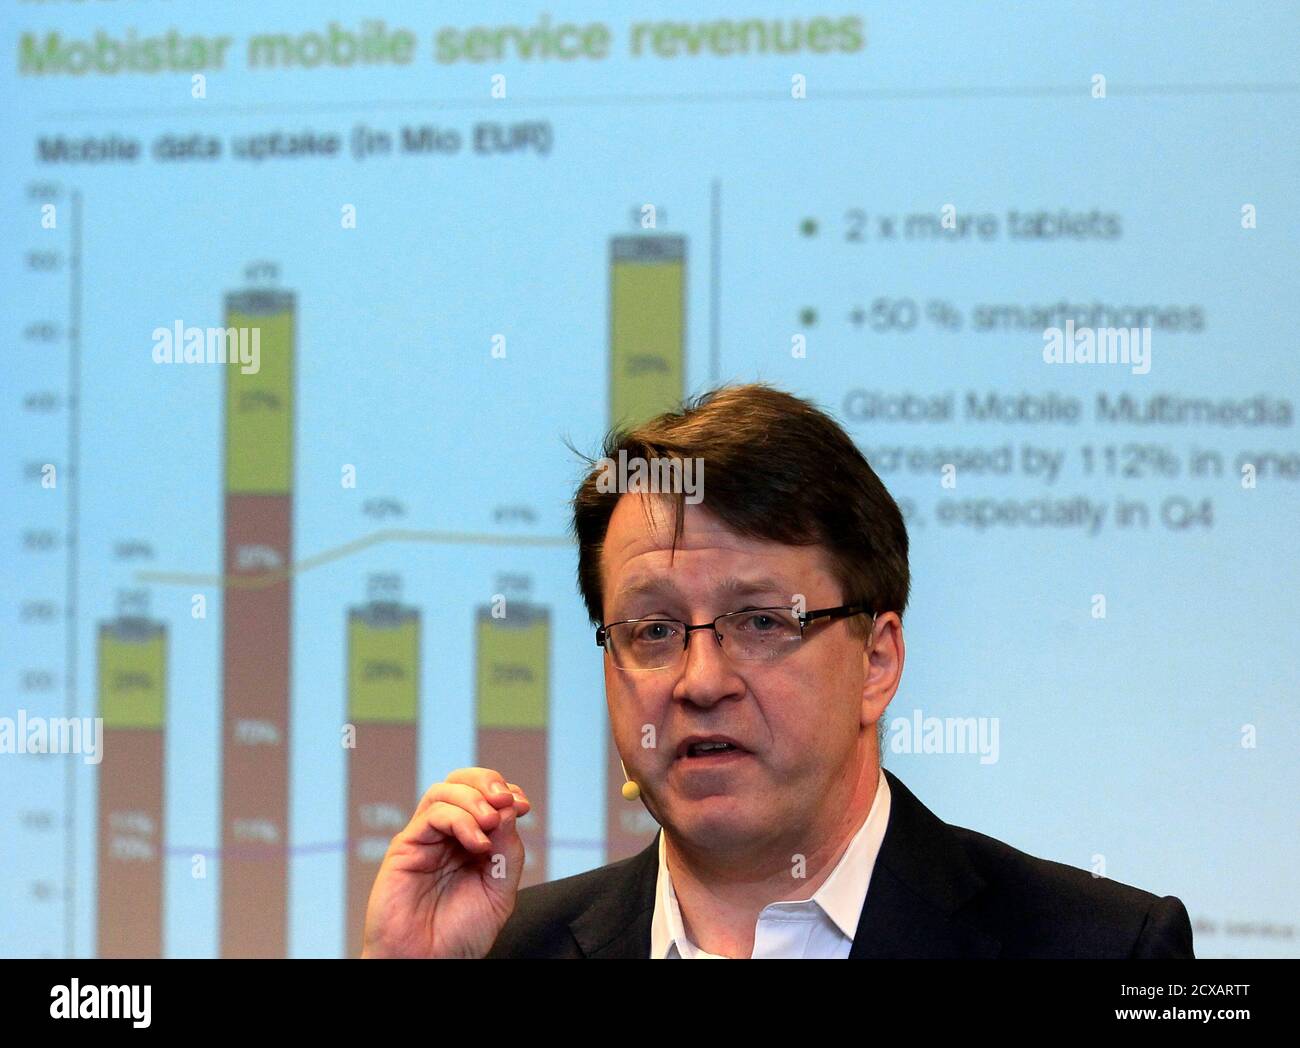 Mobistar's Chief Executive Officer Jean Marc Harion presents the company's  annual results during a news conference in Brussels February 6, 2013.  Belgian mobile phone operator Mobistar said 2013 earnings would miss analyst